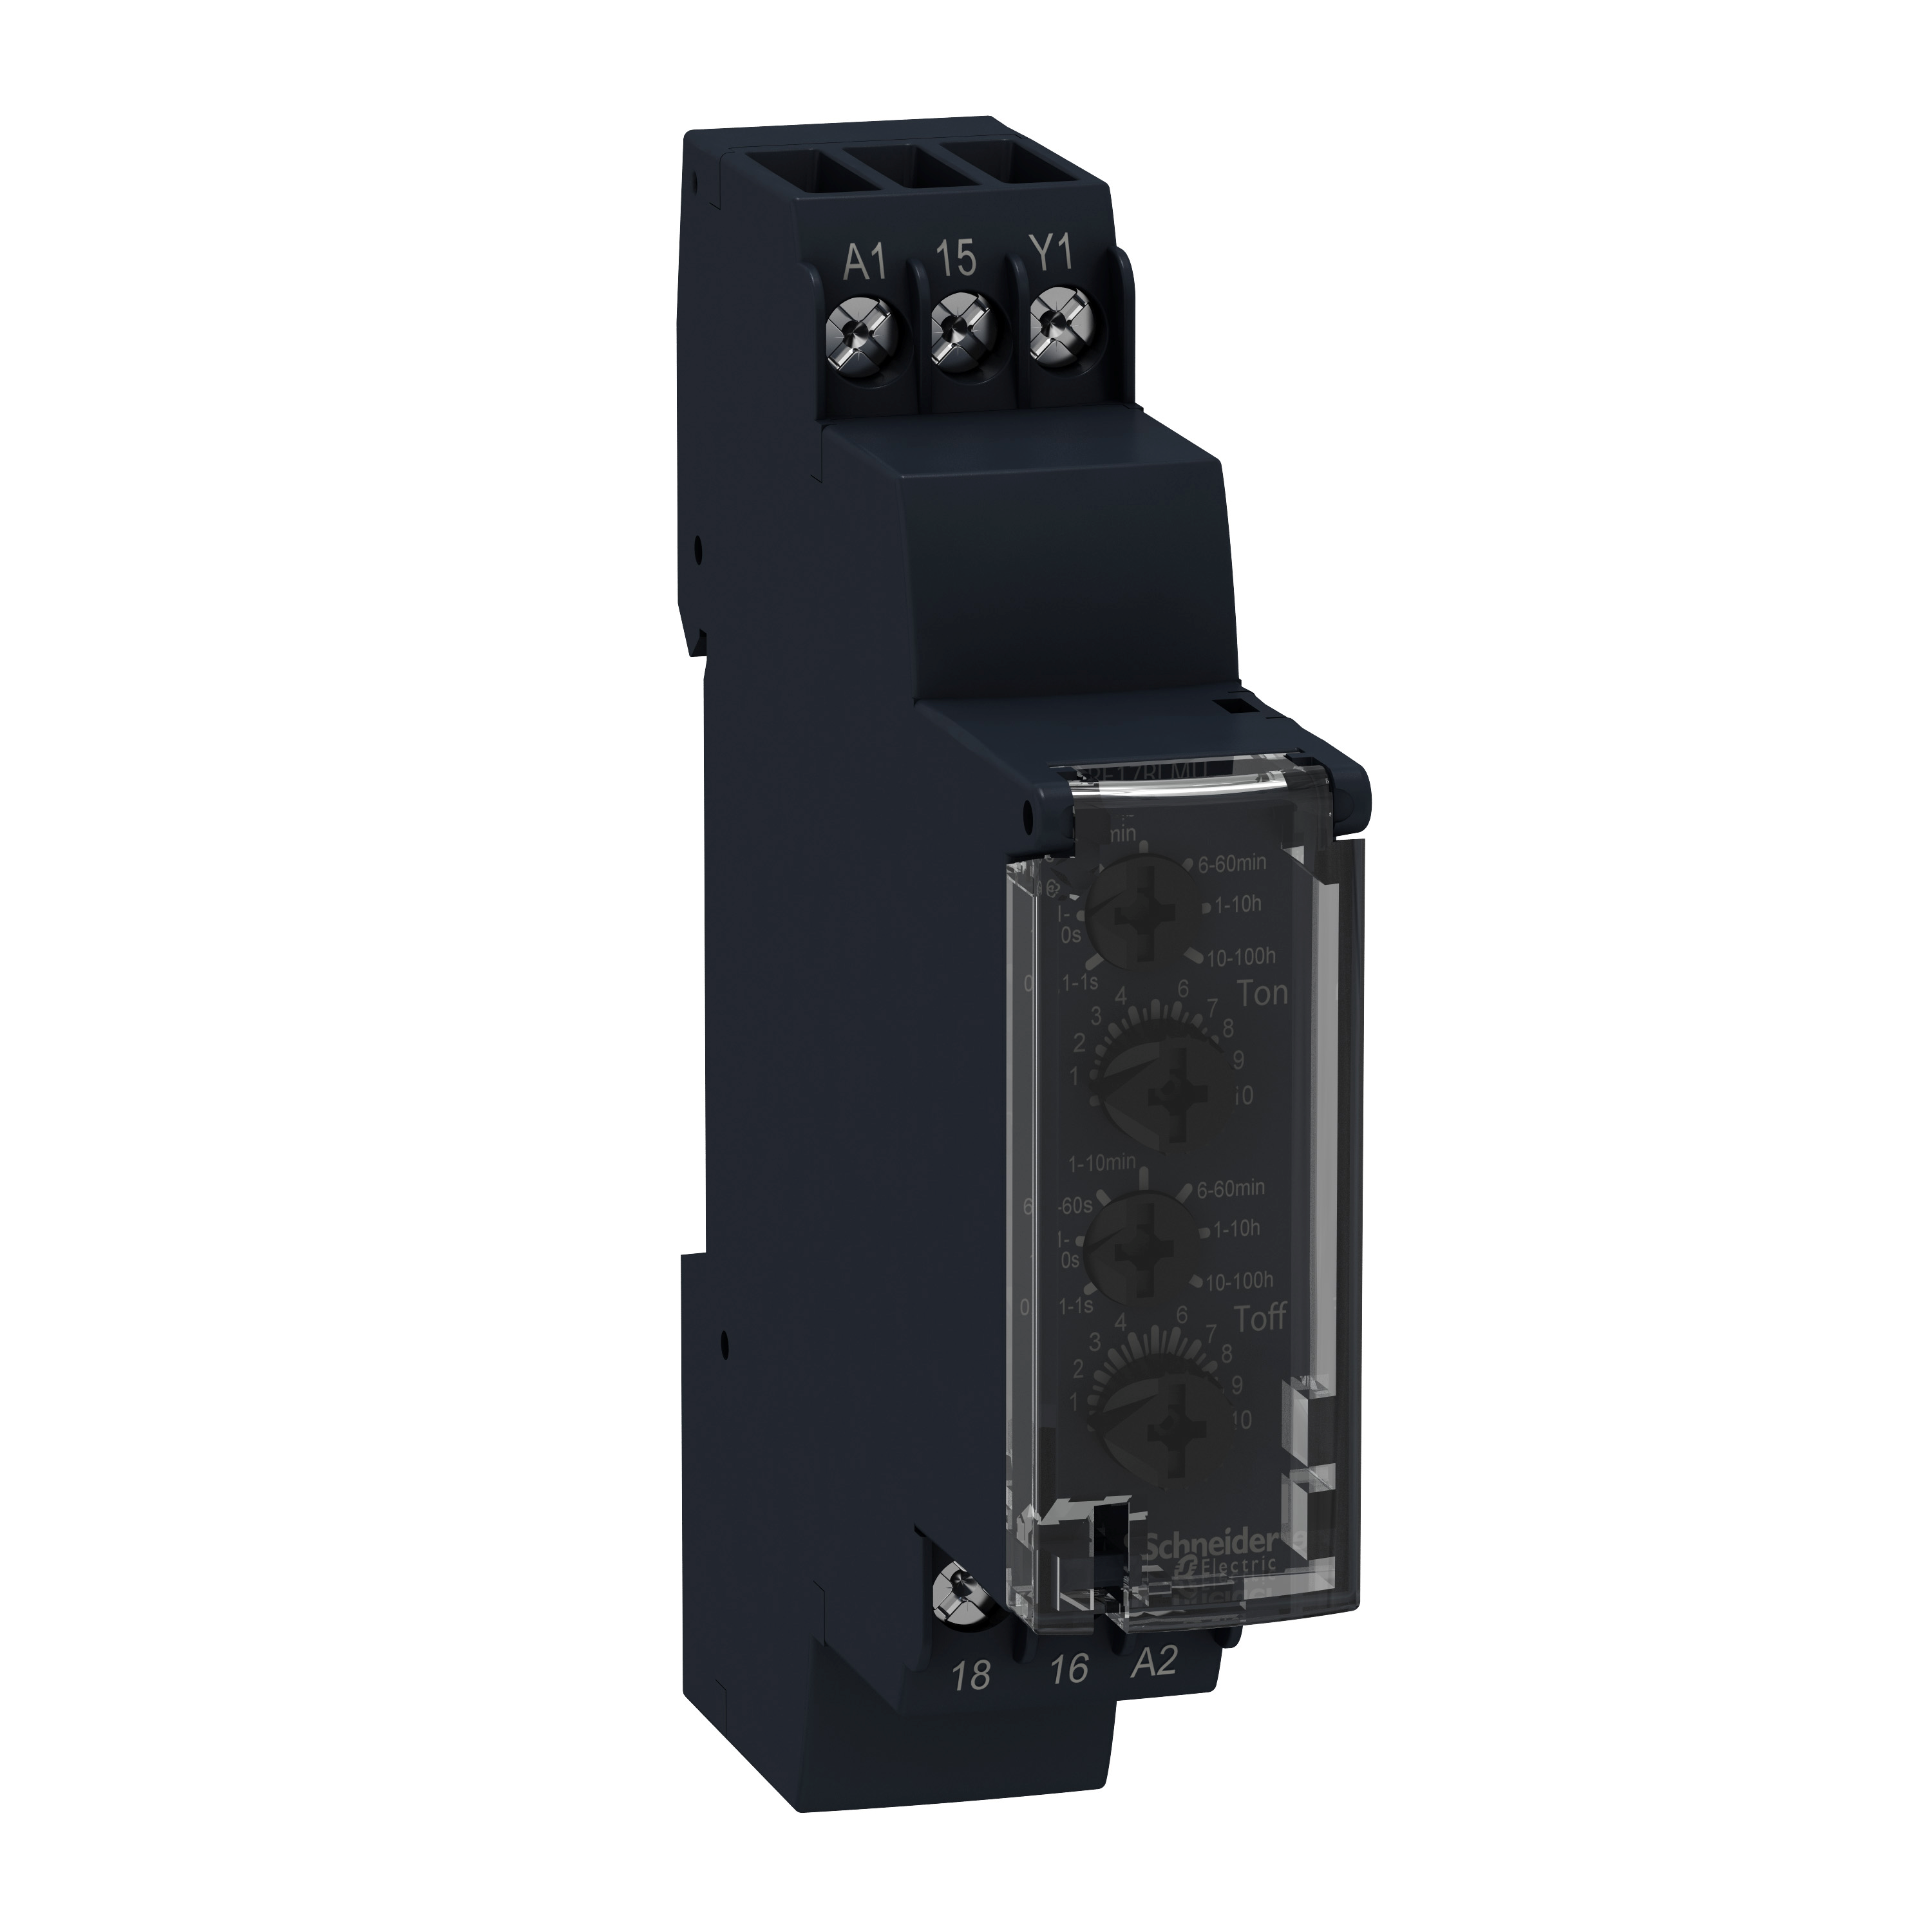 single function relay, Harmony Timer Relays, 0.7A, 1s..100h, asymmetrical flashing, solid state output, 24 to 240V AC